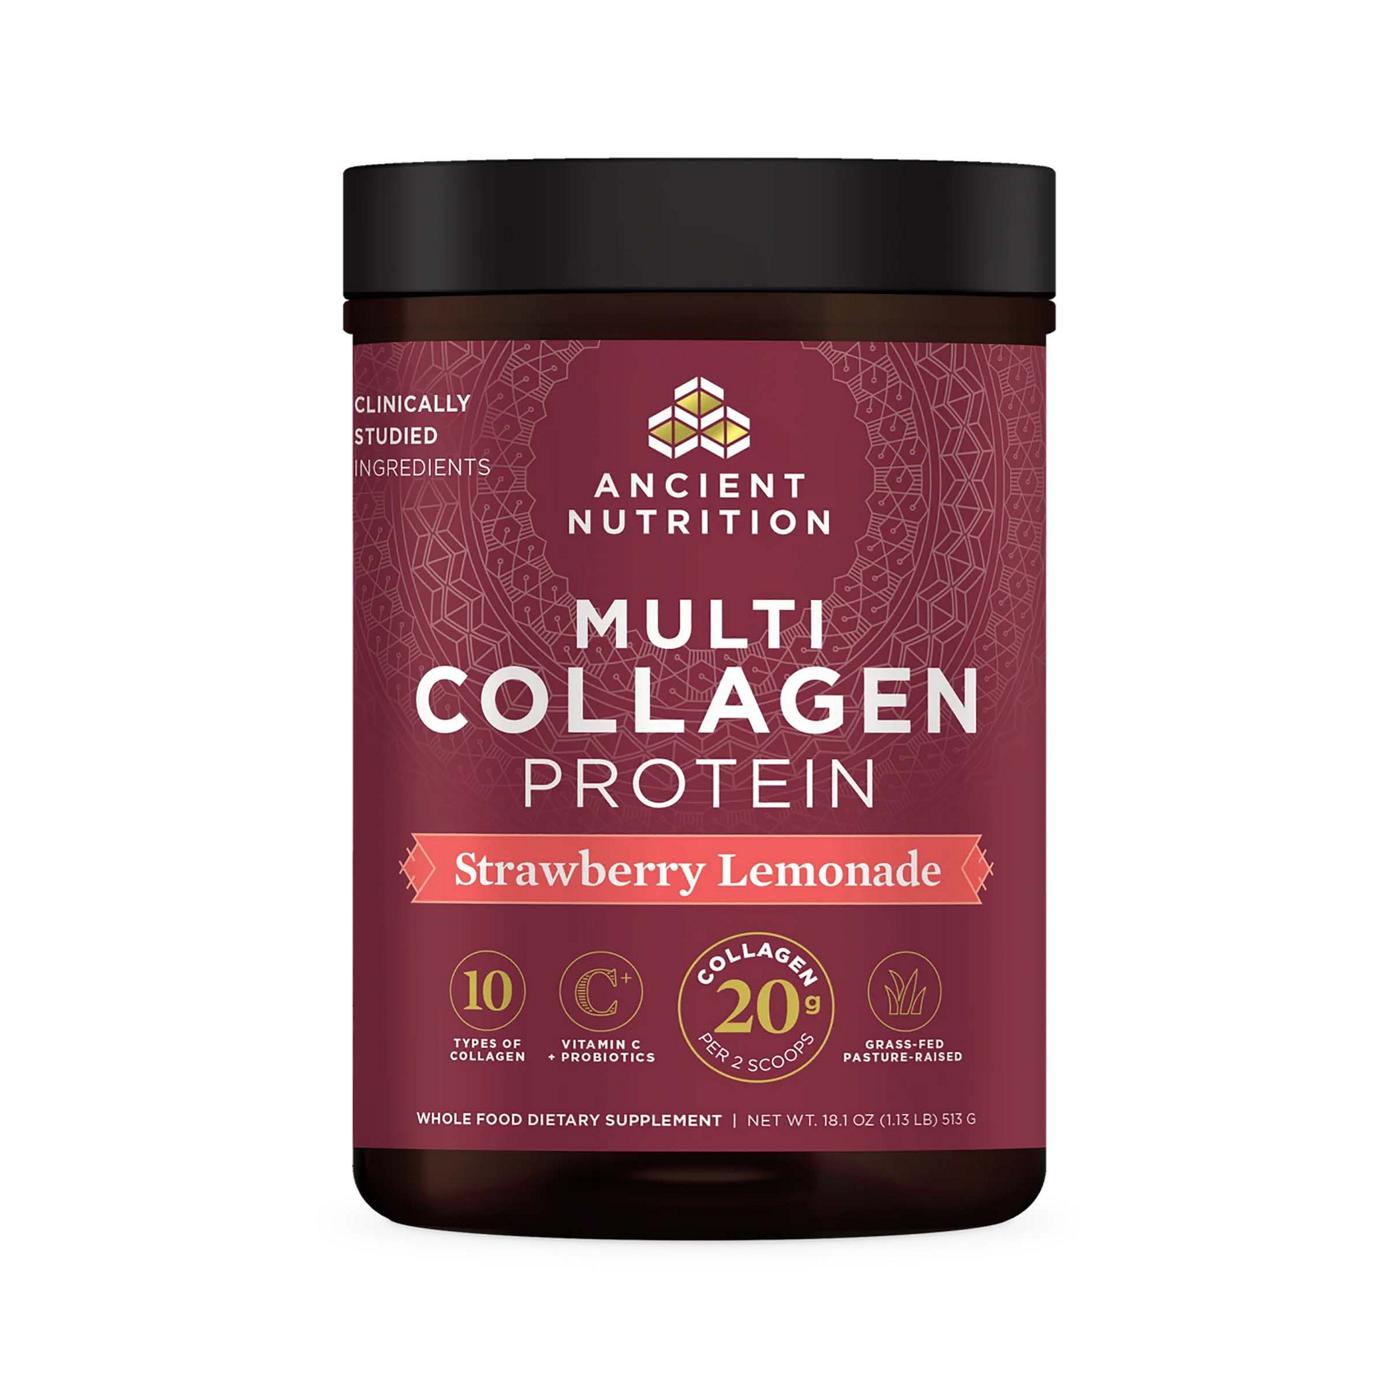 Ancient Nutrition Multi Collagen Protein Supplement - Strawberry Lemonade; image 1 of 8